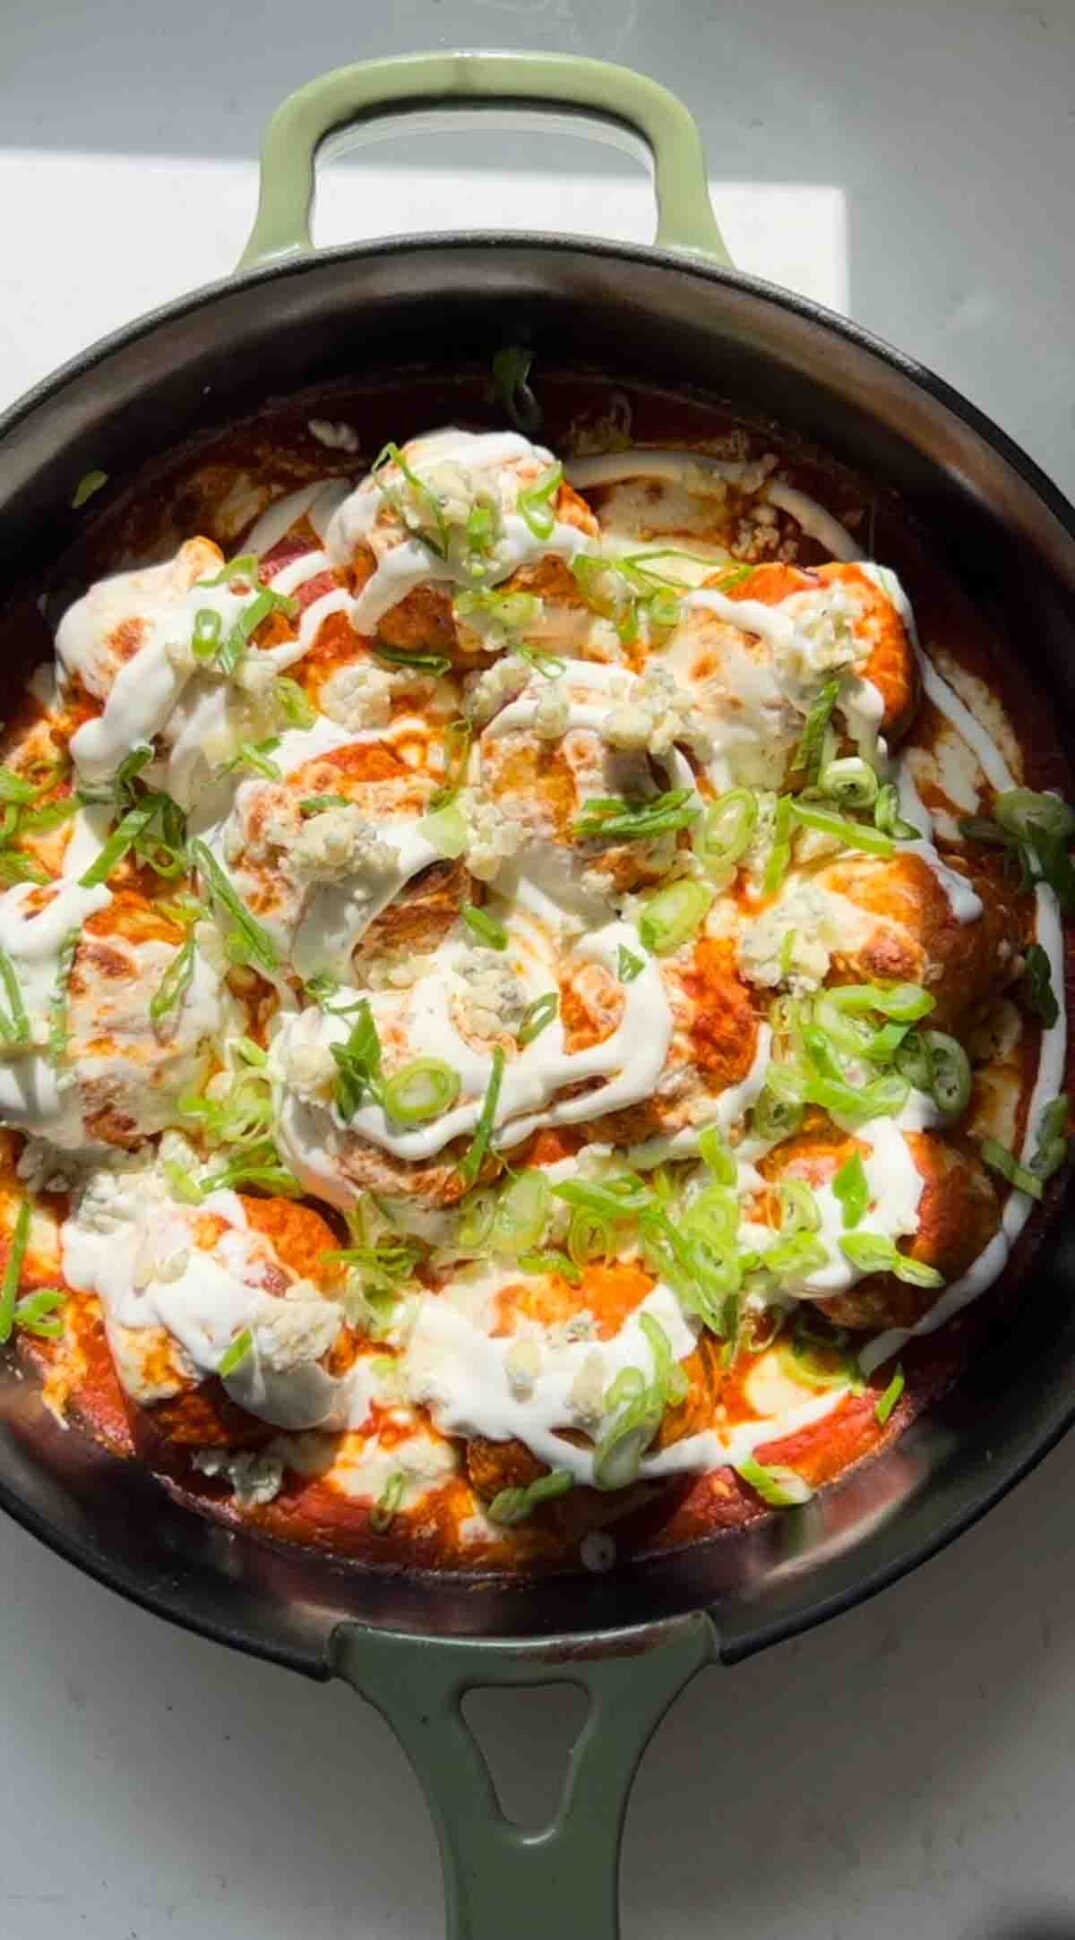 buffalo chicken meatballs covered with blue cheese, ranch dressing and scallions in a green cast iron skillet.